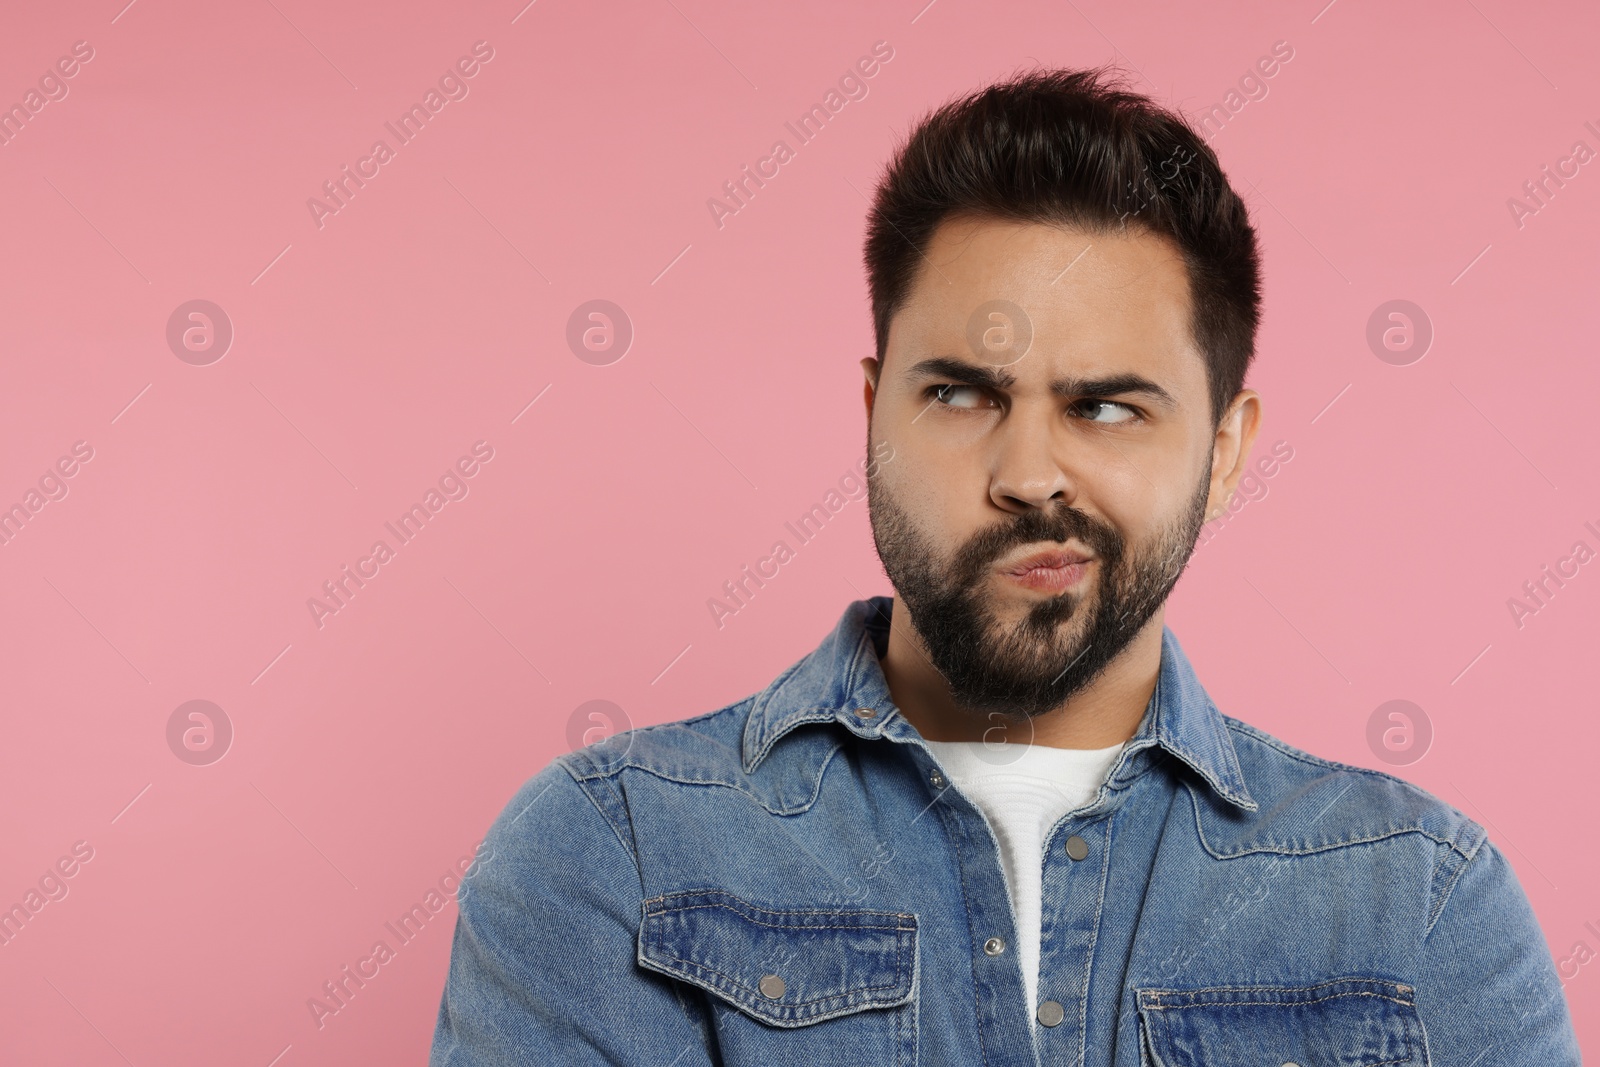 Photo of Resentful man on pink background. Space for text